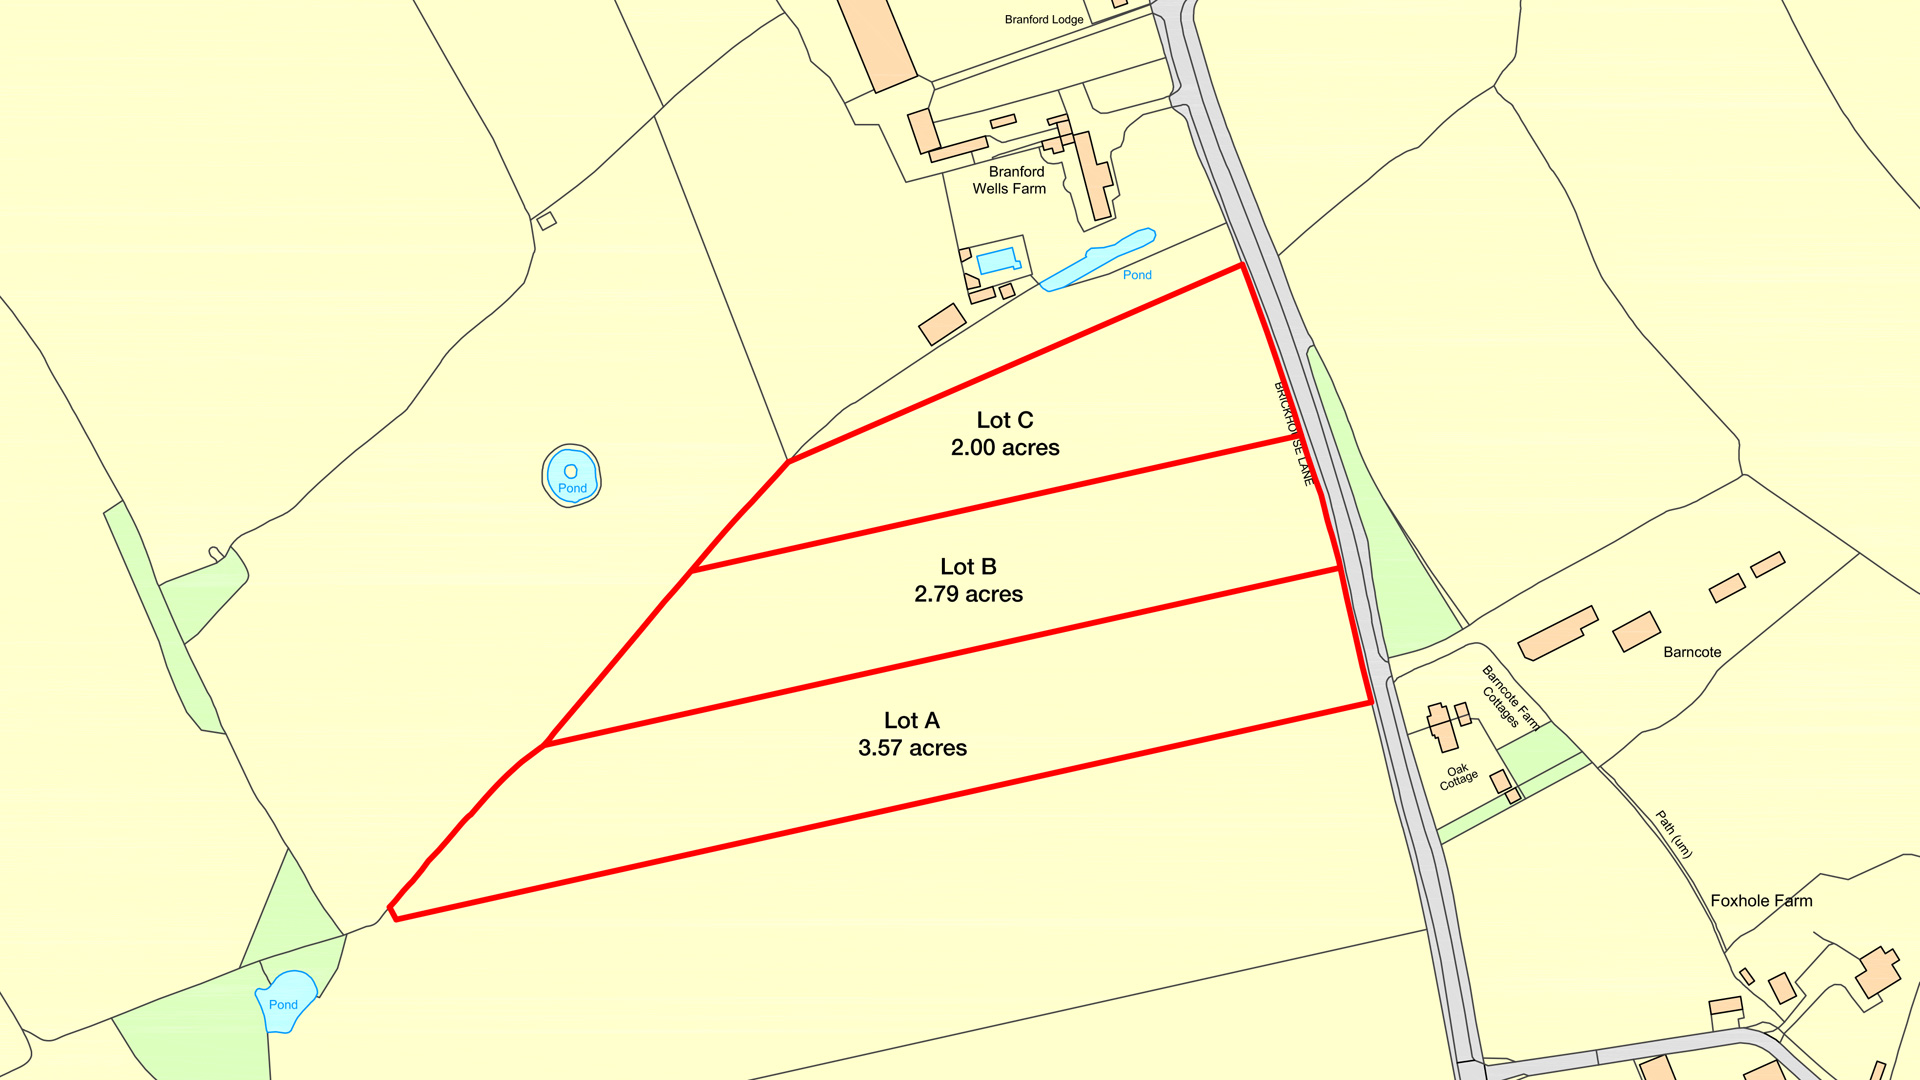 Land for sale in Newchapel, Lingfield site plan